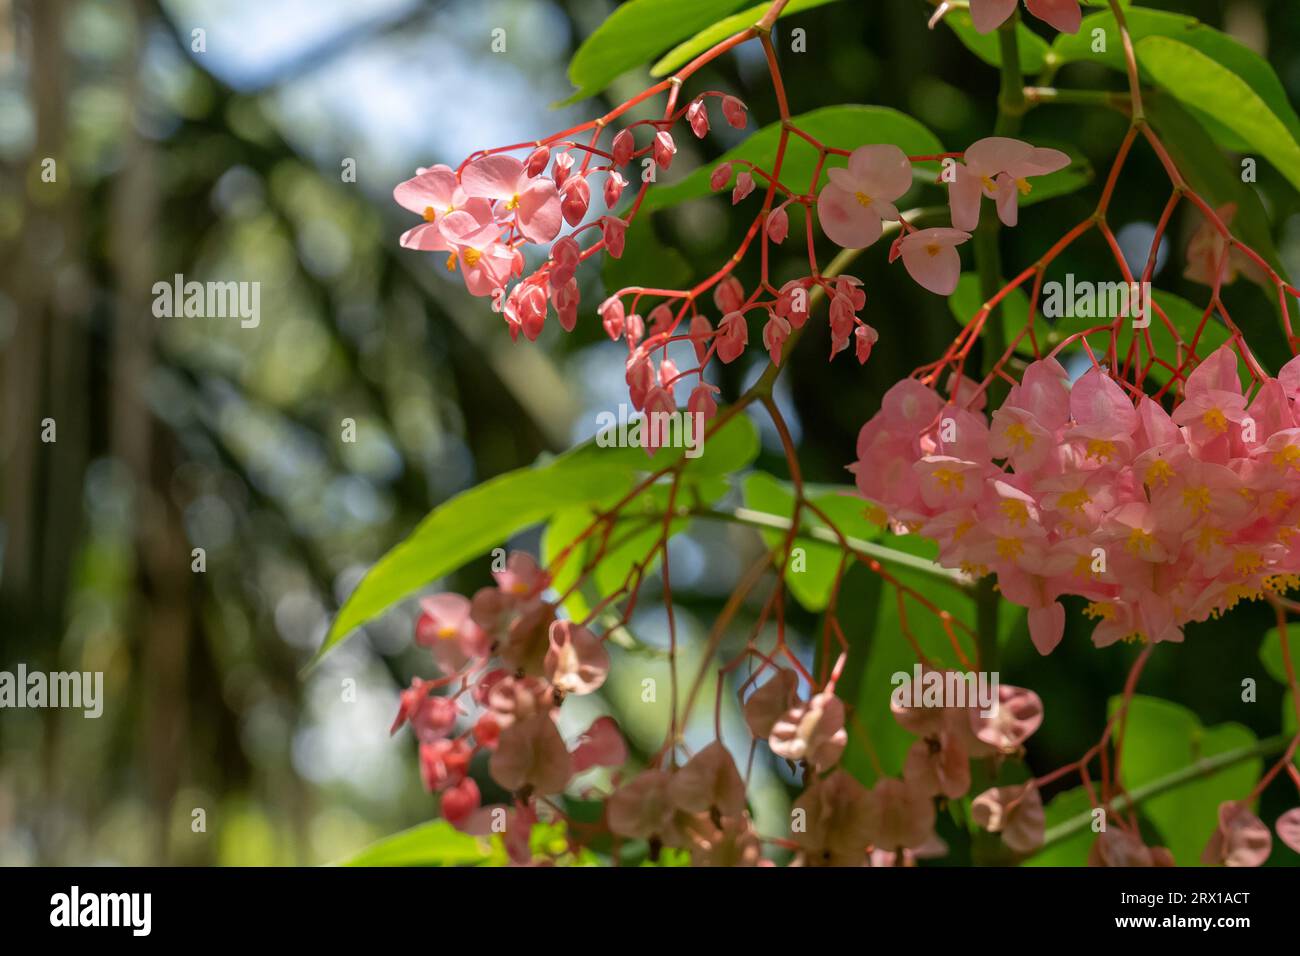 Colorful flowers in the garden and in nature. Stock Photo